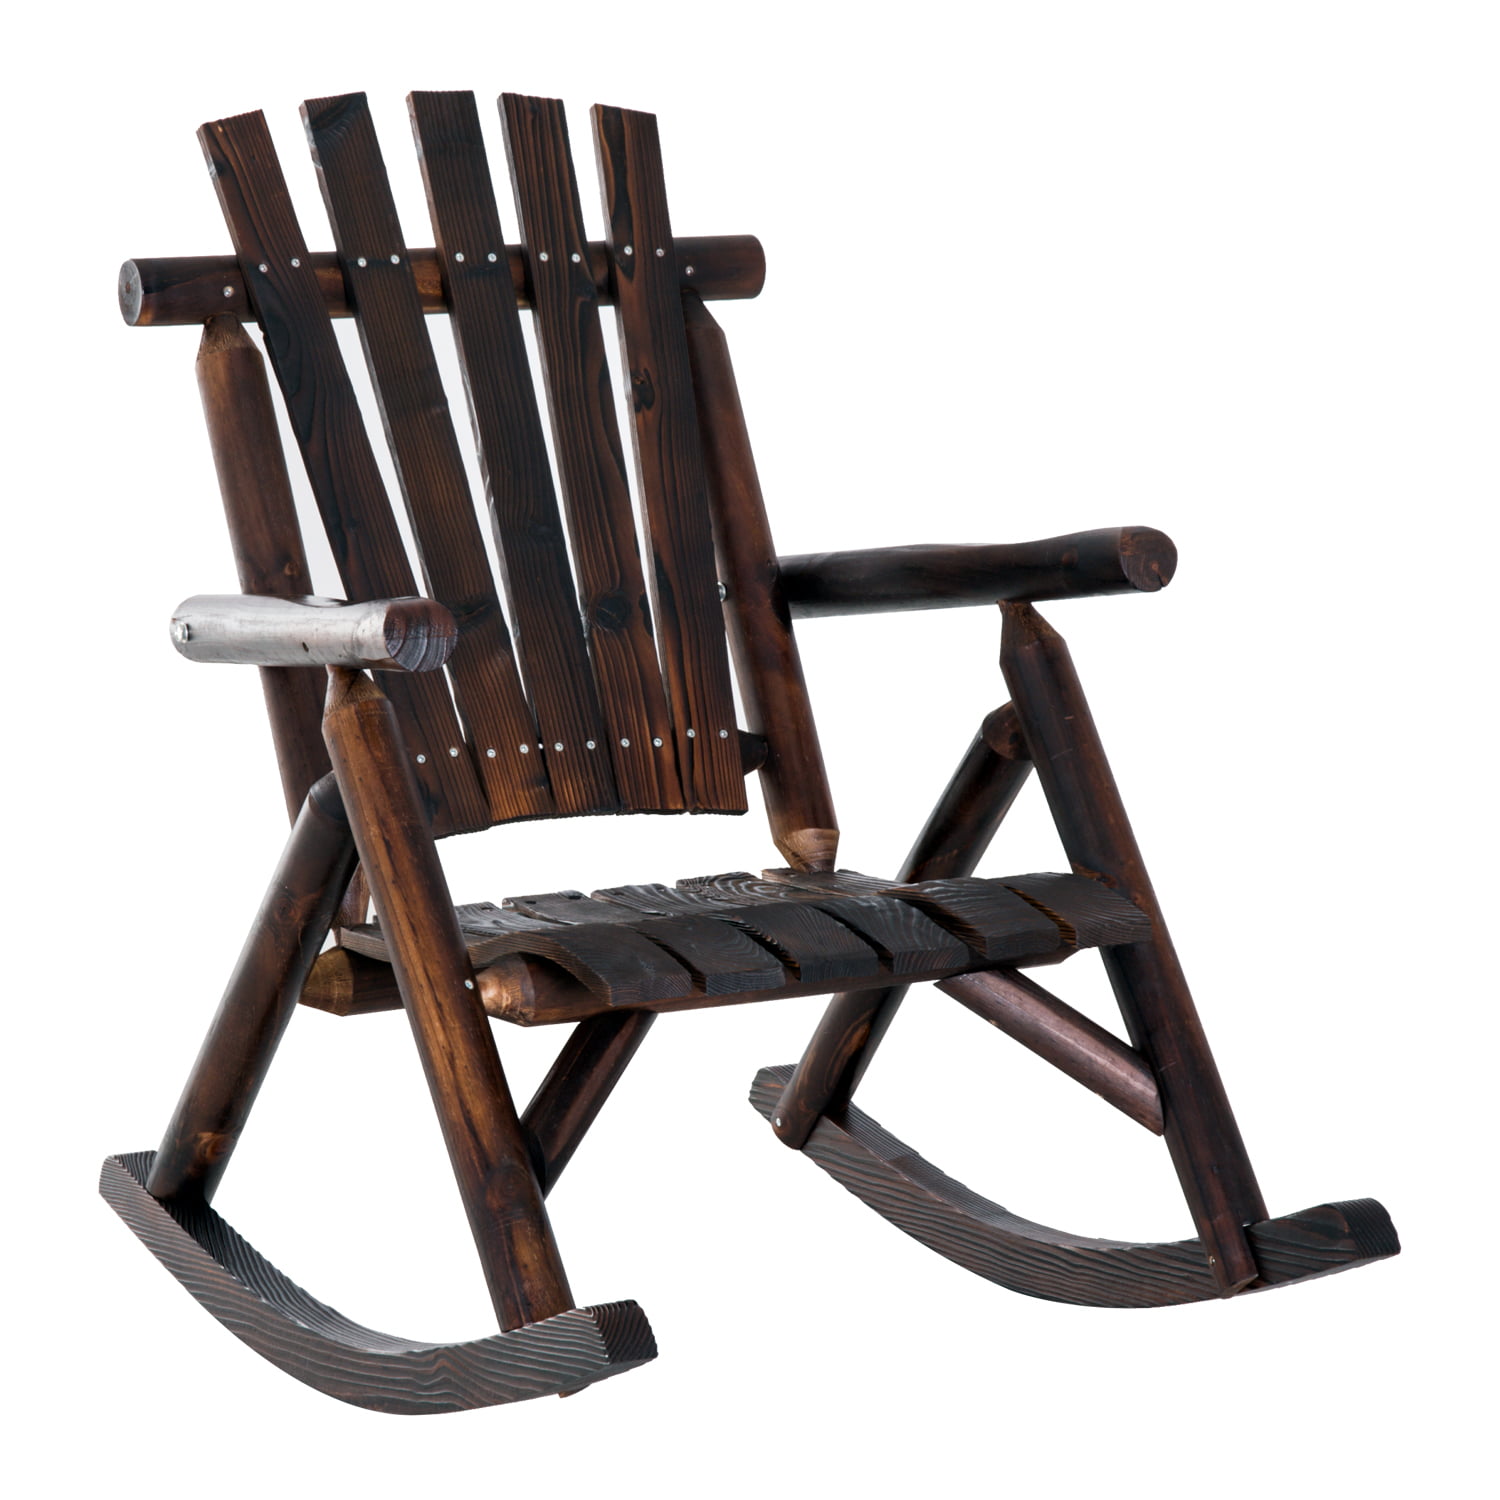 Weather Resistant by Mainstays Black Color Details about   Outdoor Wood Porch Rocking Chair 